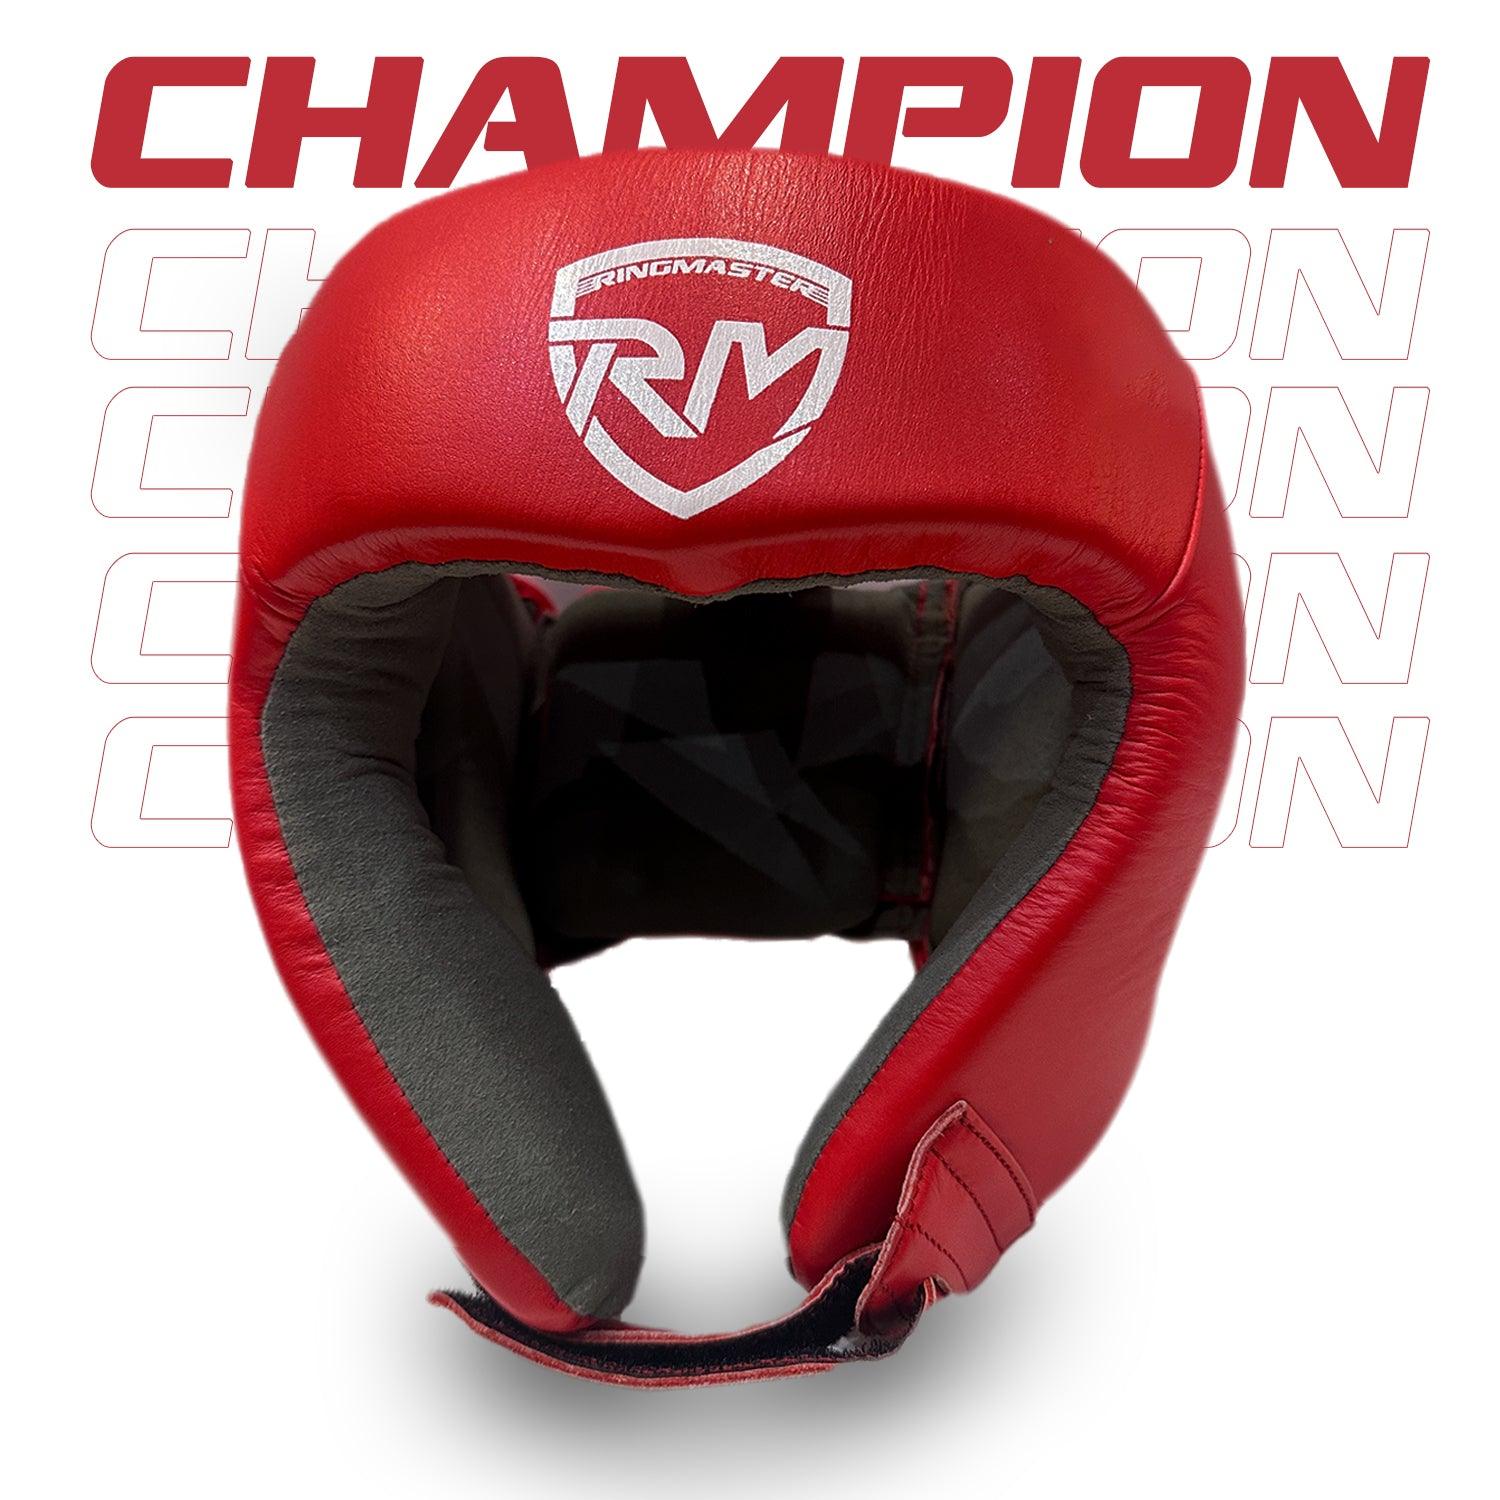 Ringmaster Head guard Boxing, Best boxing head guard, boxing head guard uk, MMA head guard, boxing headgear, Martial Arts head guard, boxing head guard open face, Boxing head guard for sale, face guard boxing, Red Head guard Boxing, RingMaster Sports Open Face Boxing HeadGuard Synthetic Leather Red Image 2